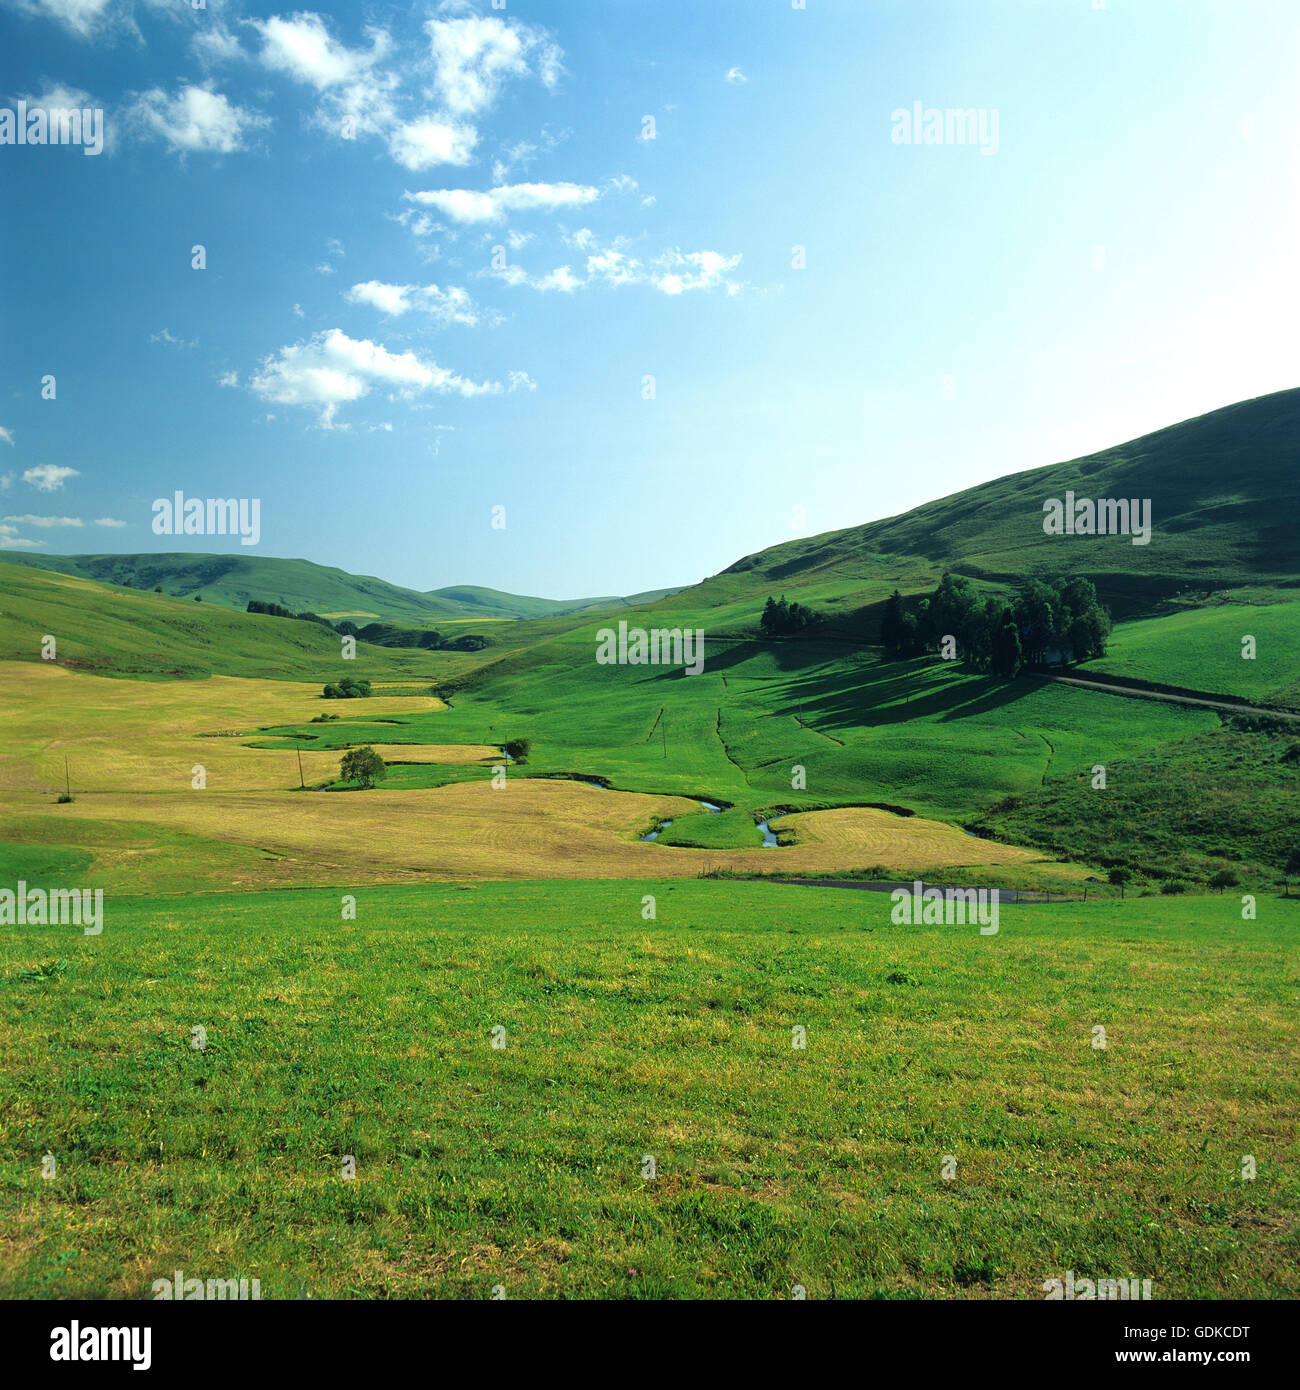 Valley of Jasy, Cezallier, Puy de Dome, Auvergne, France, Europe Stock Photo